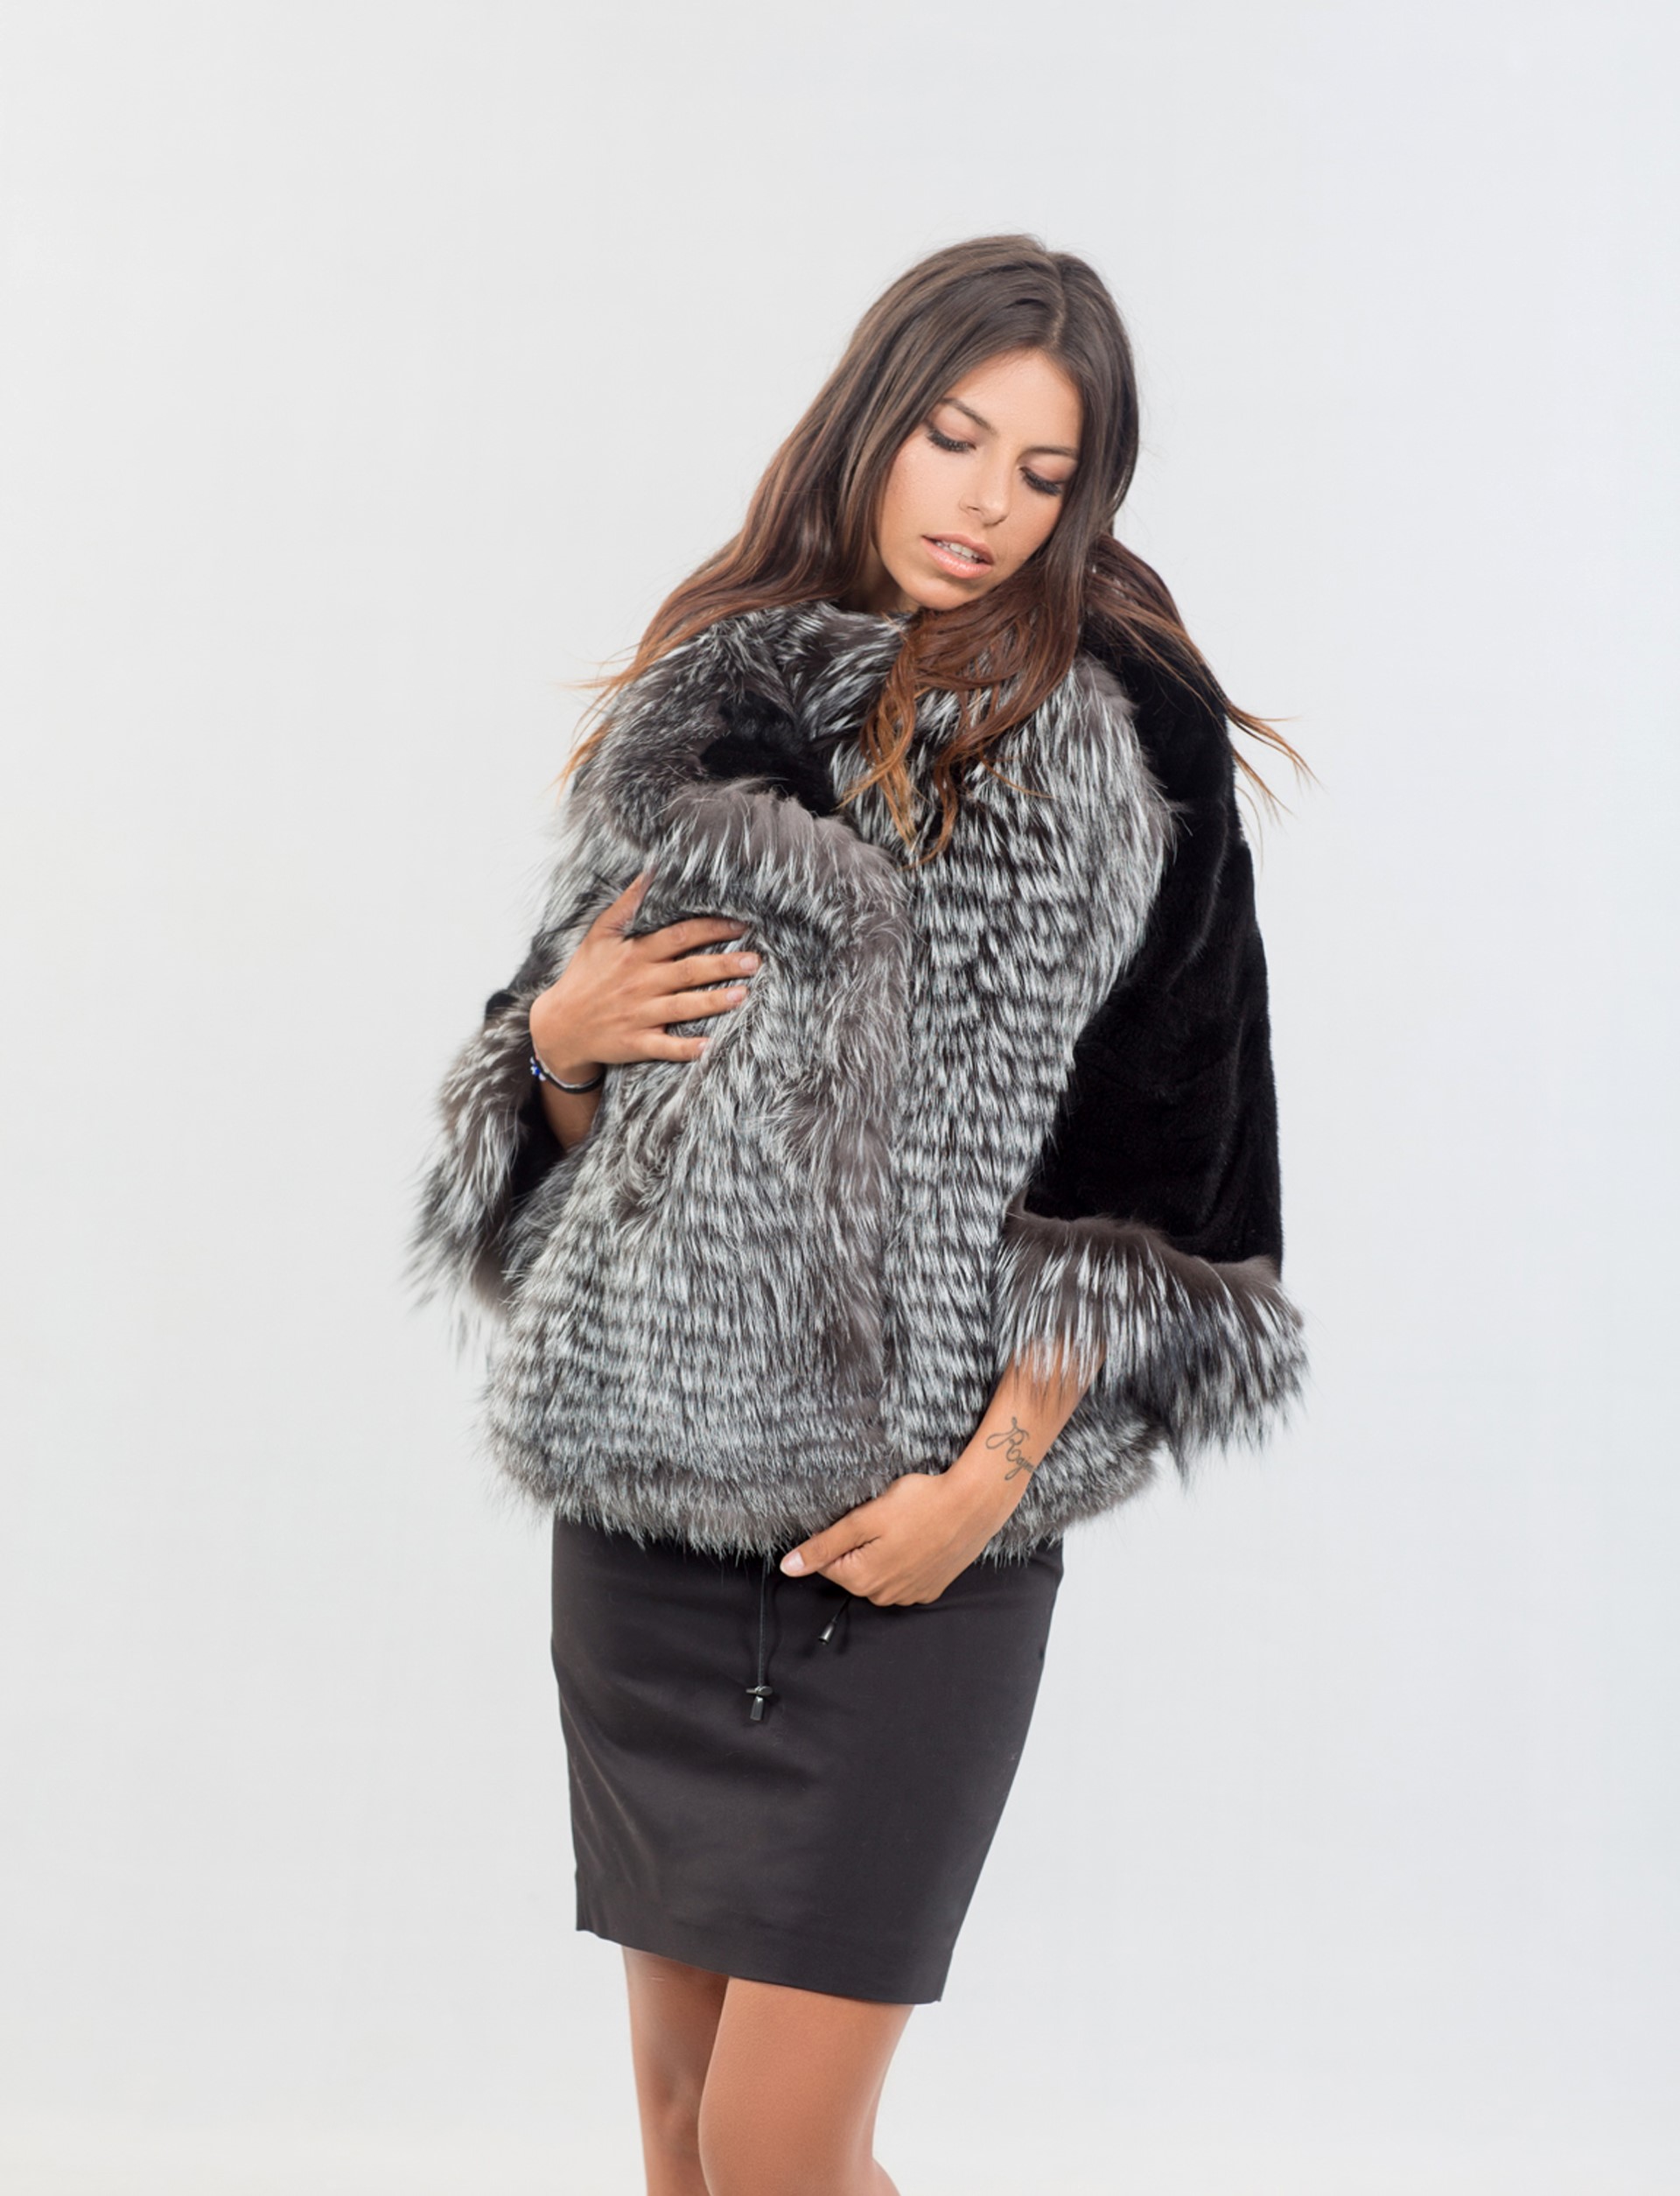 Silver Fox Fur Jacket. 100% Real Fur Coats and Accessories.